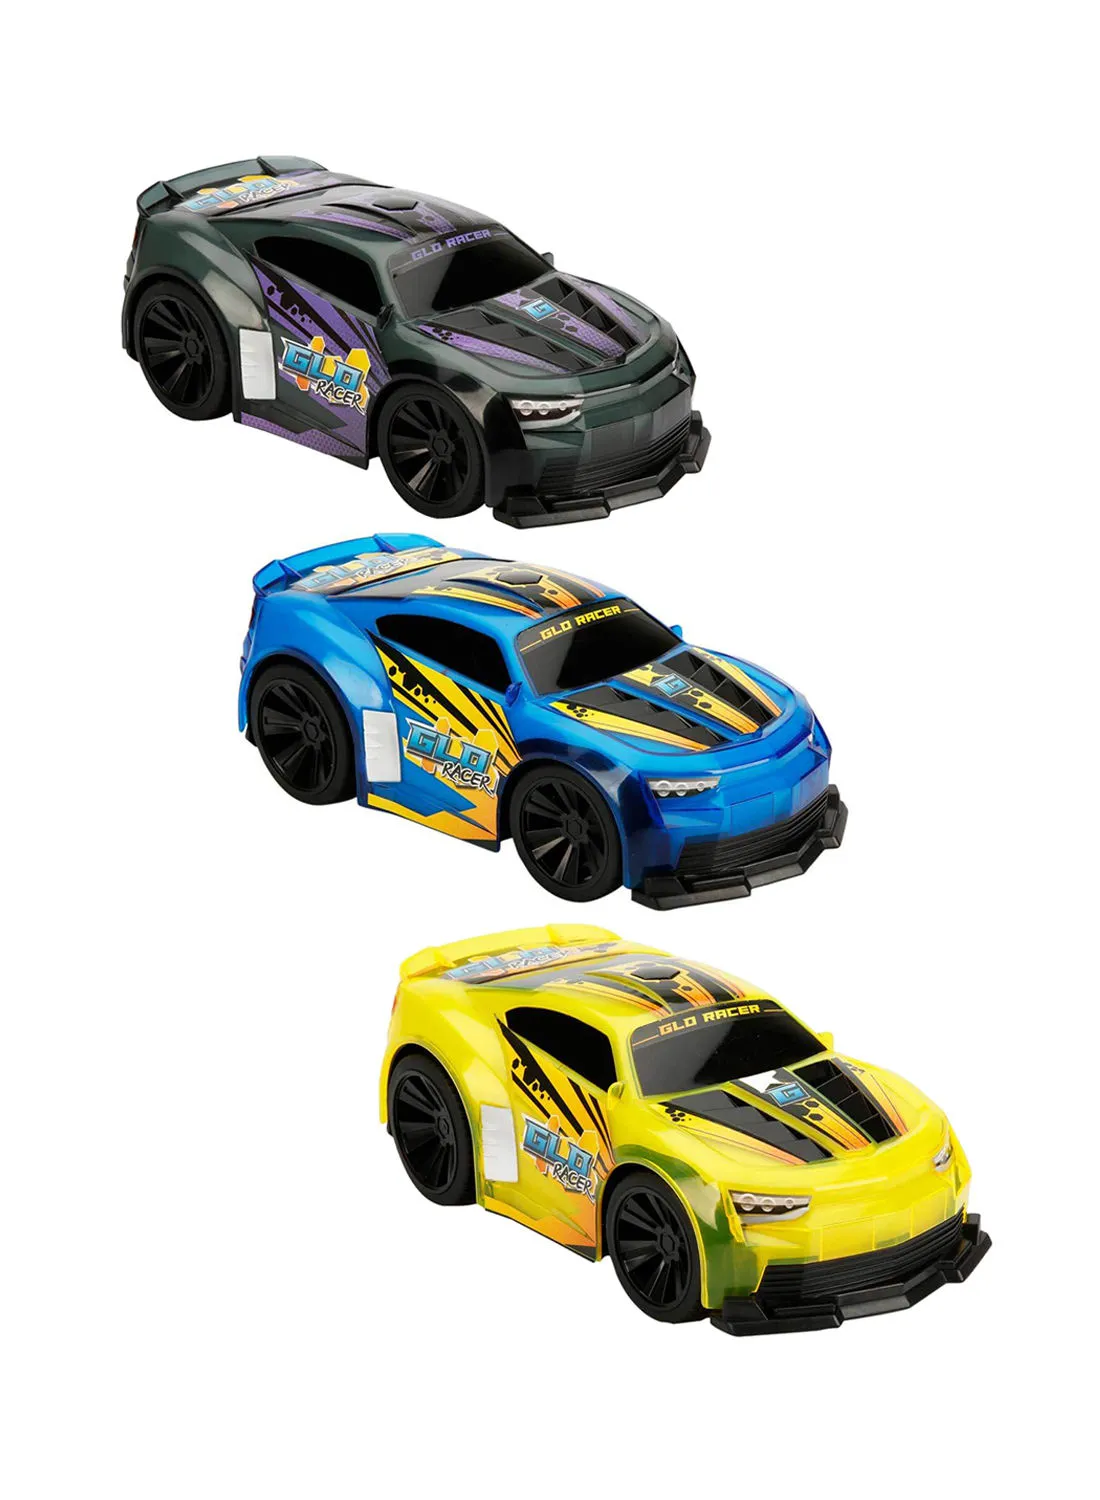 Kidztech 1:16 Glo Racer Remote Control Car - Assorted